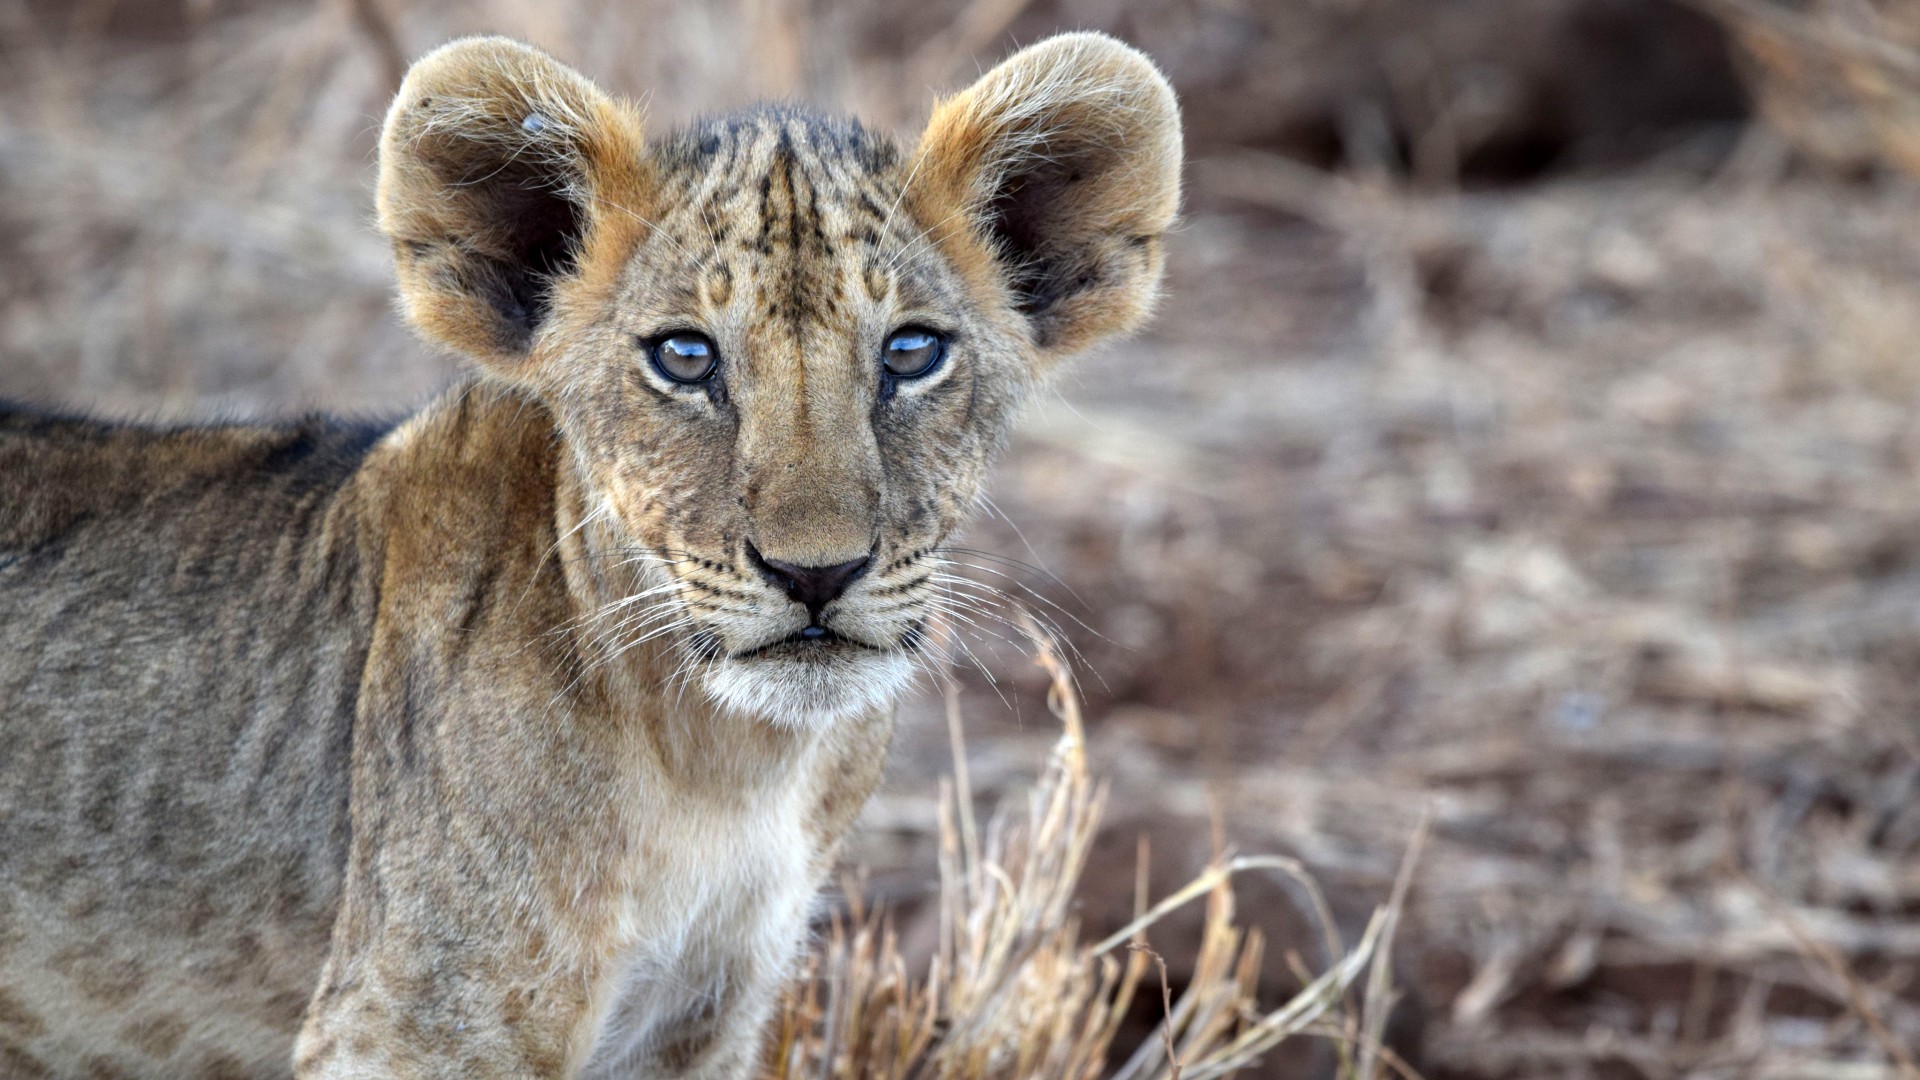 A young wild lion cub staring directly at the camera